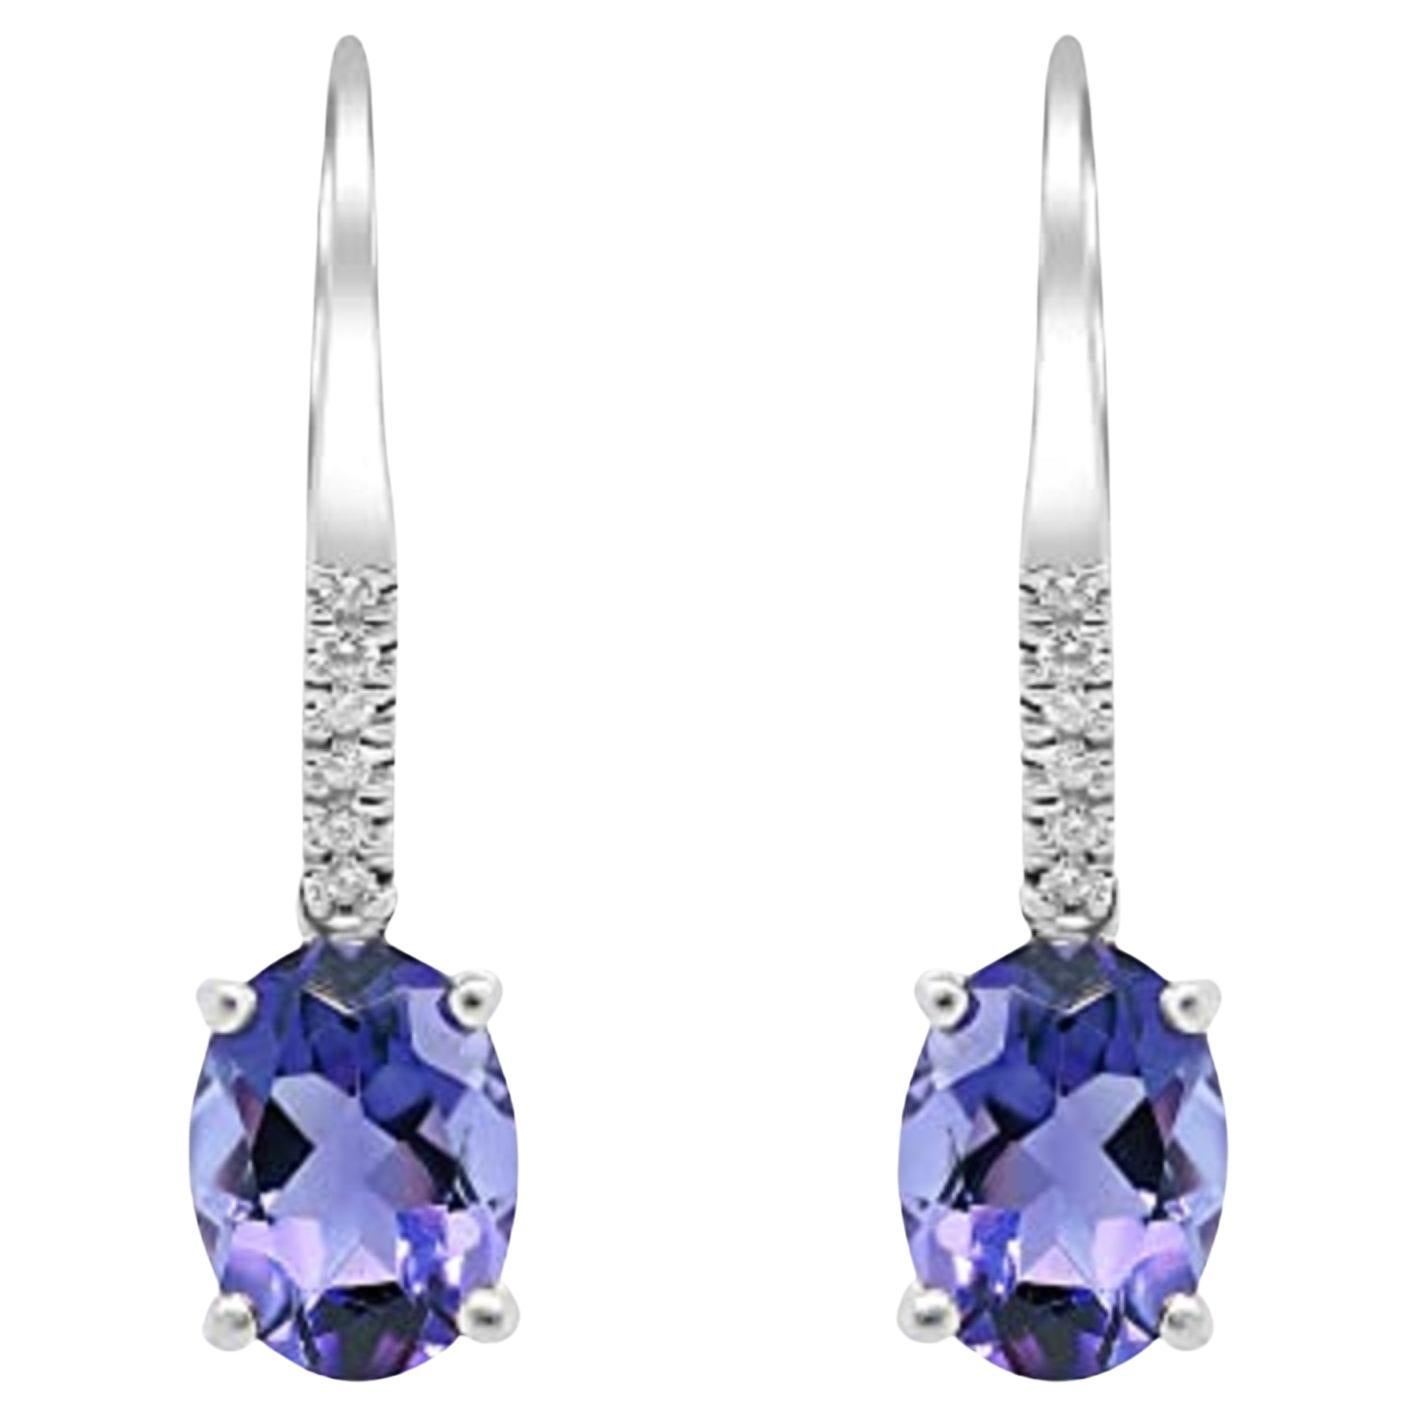 Gin and Grace 14K White Gold Genuine Tanzanite Earrings with Diamonds For Women For Sale